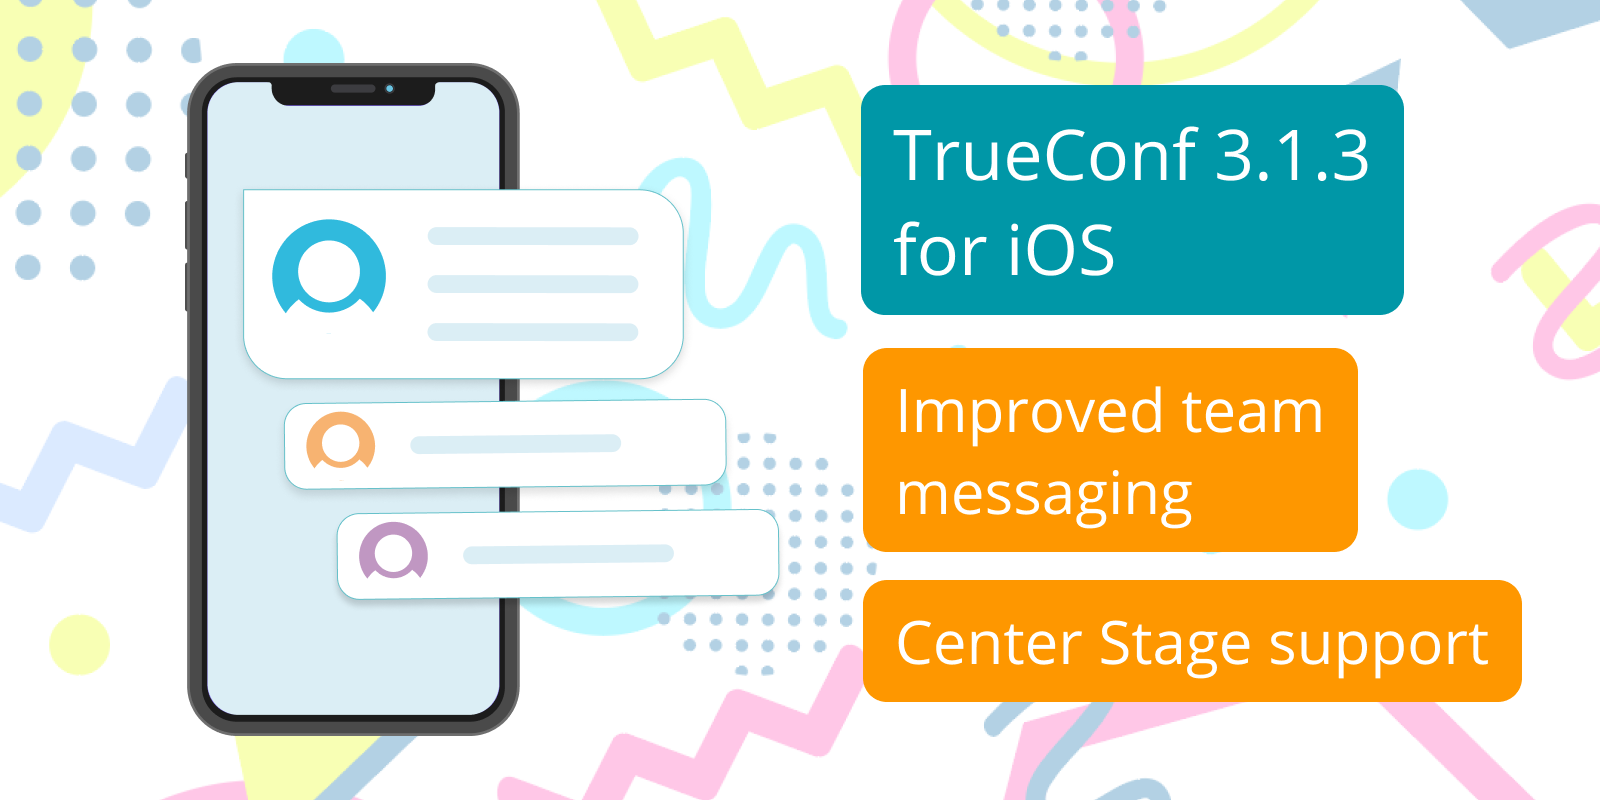 TrueConf 3.1.3 for iOS: Improved team messaging and Center Stage support 7